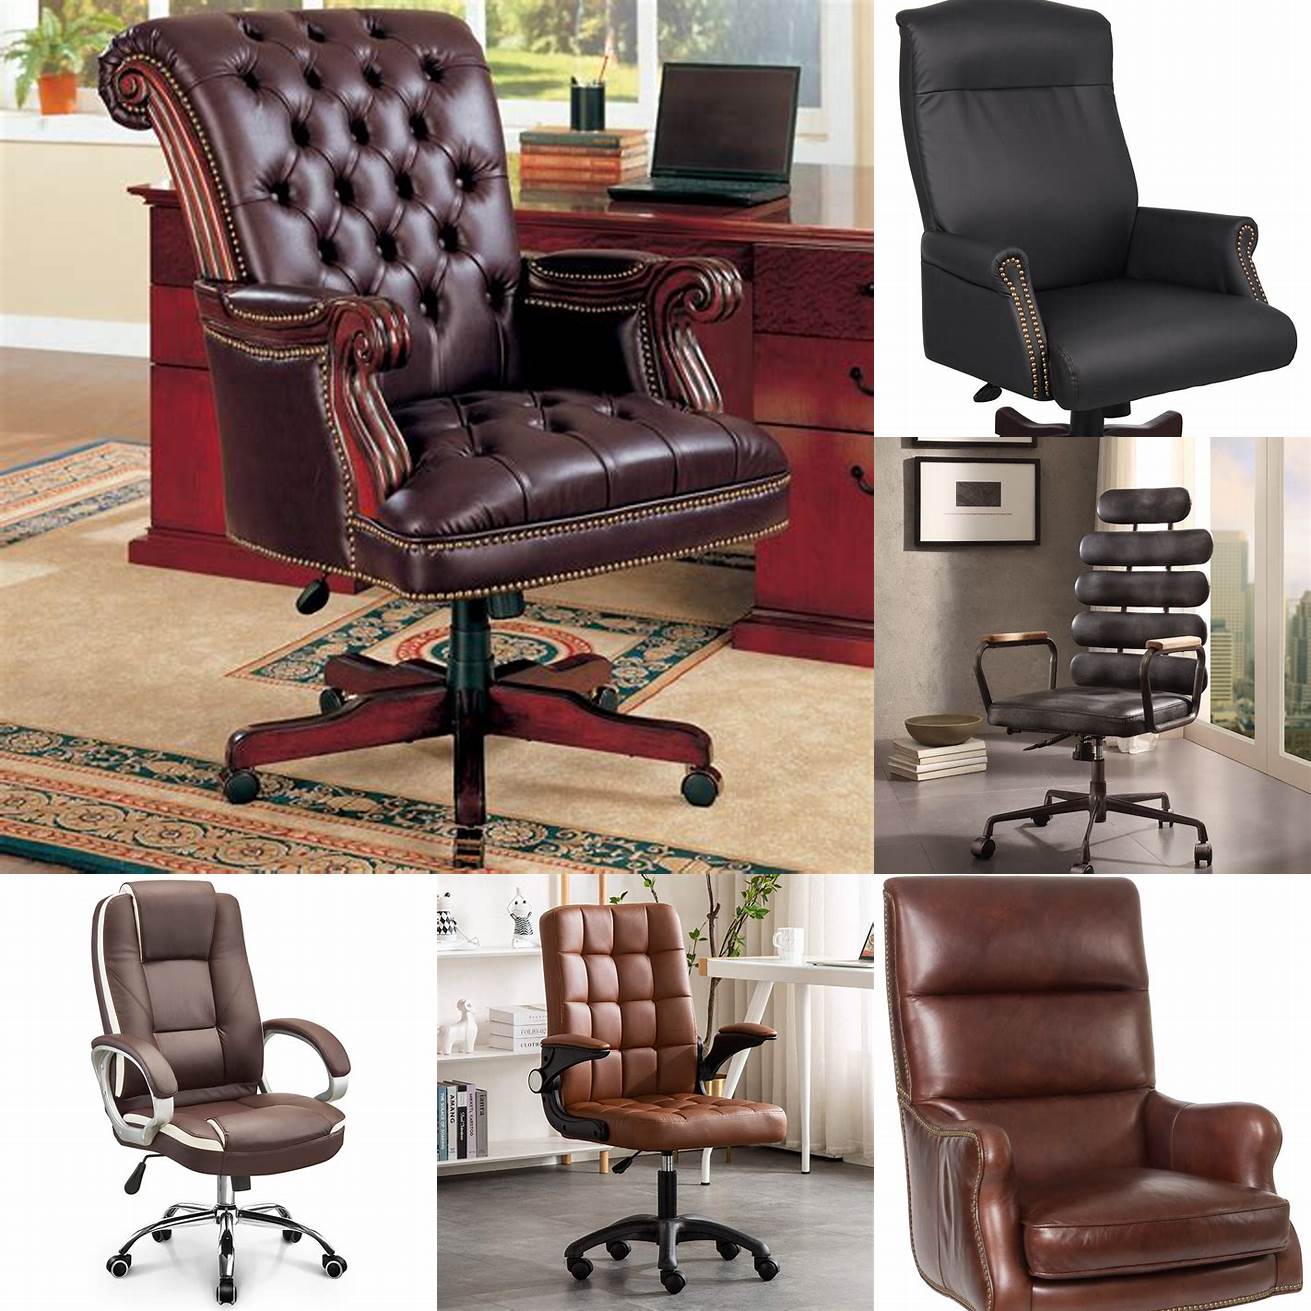 Leather executive desk chair